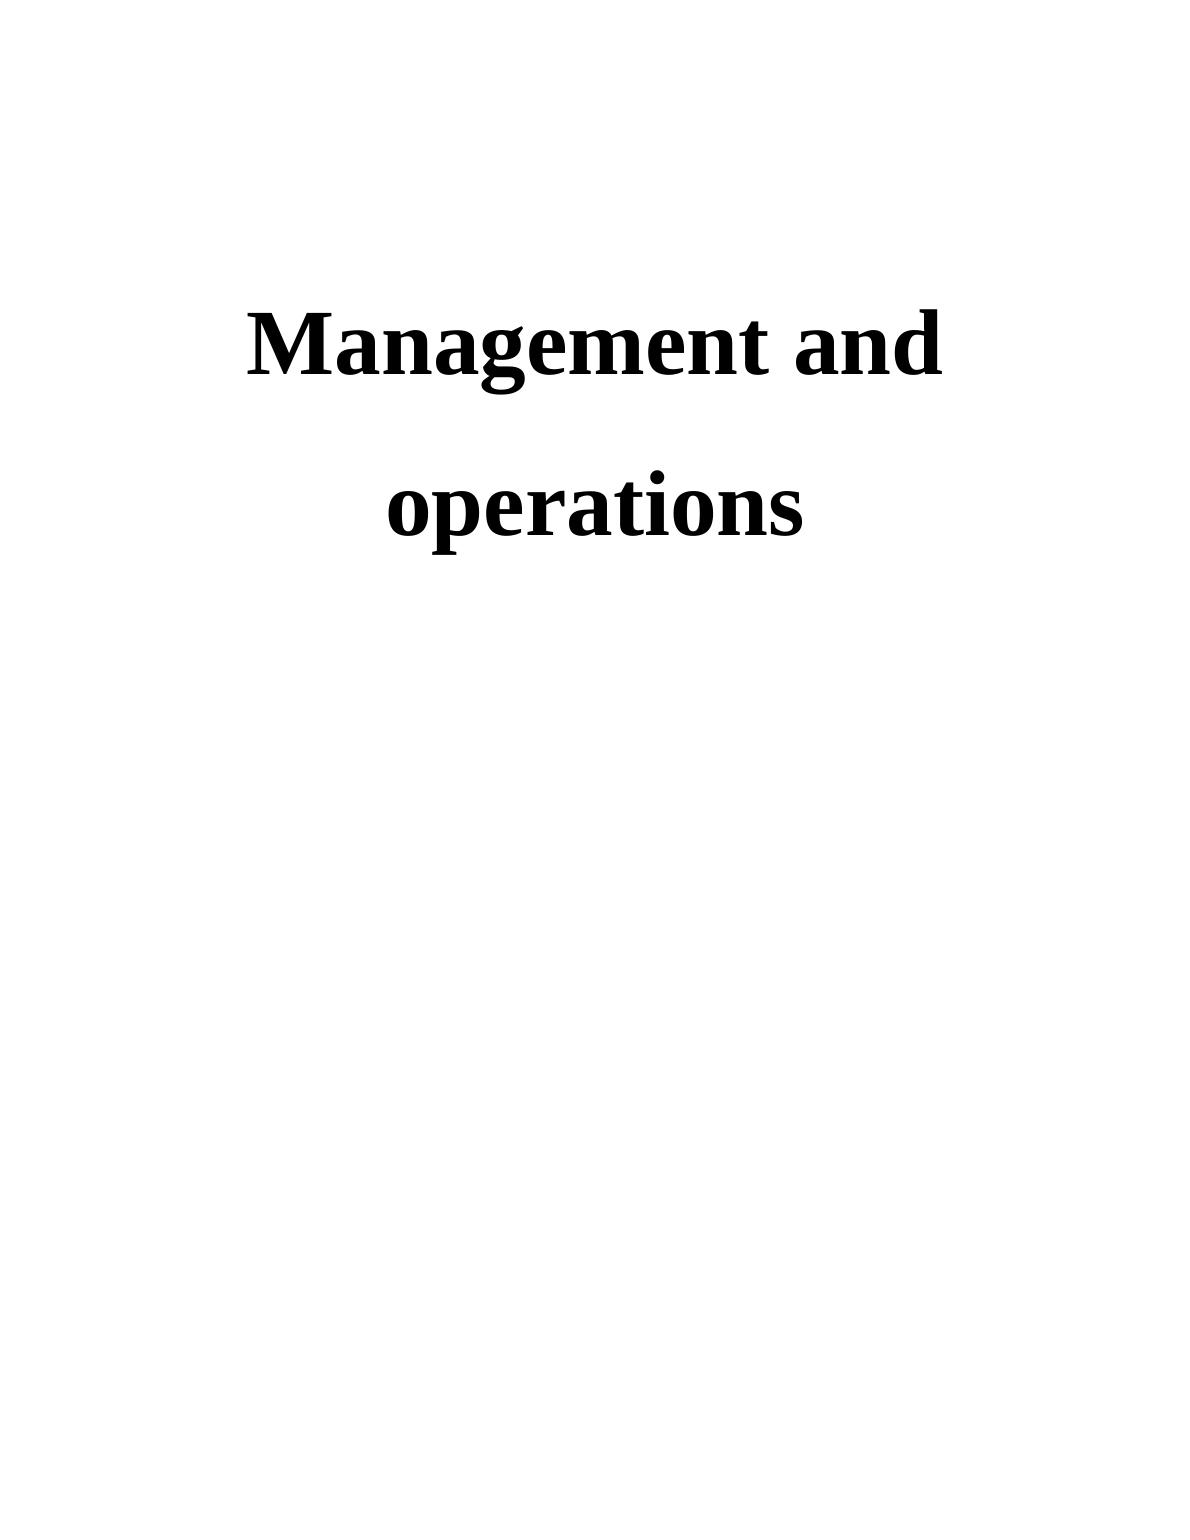 Management and Operations Assignment - Starbucks_1